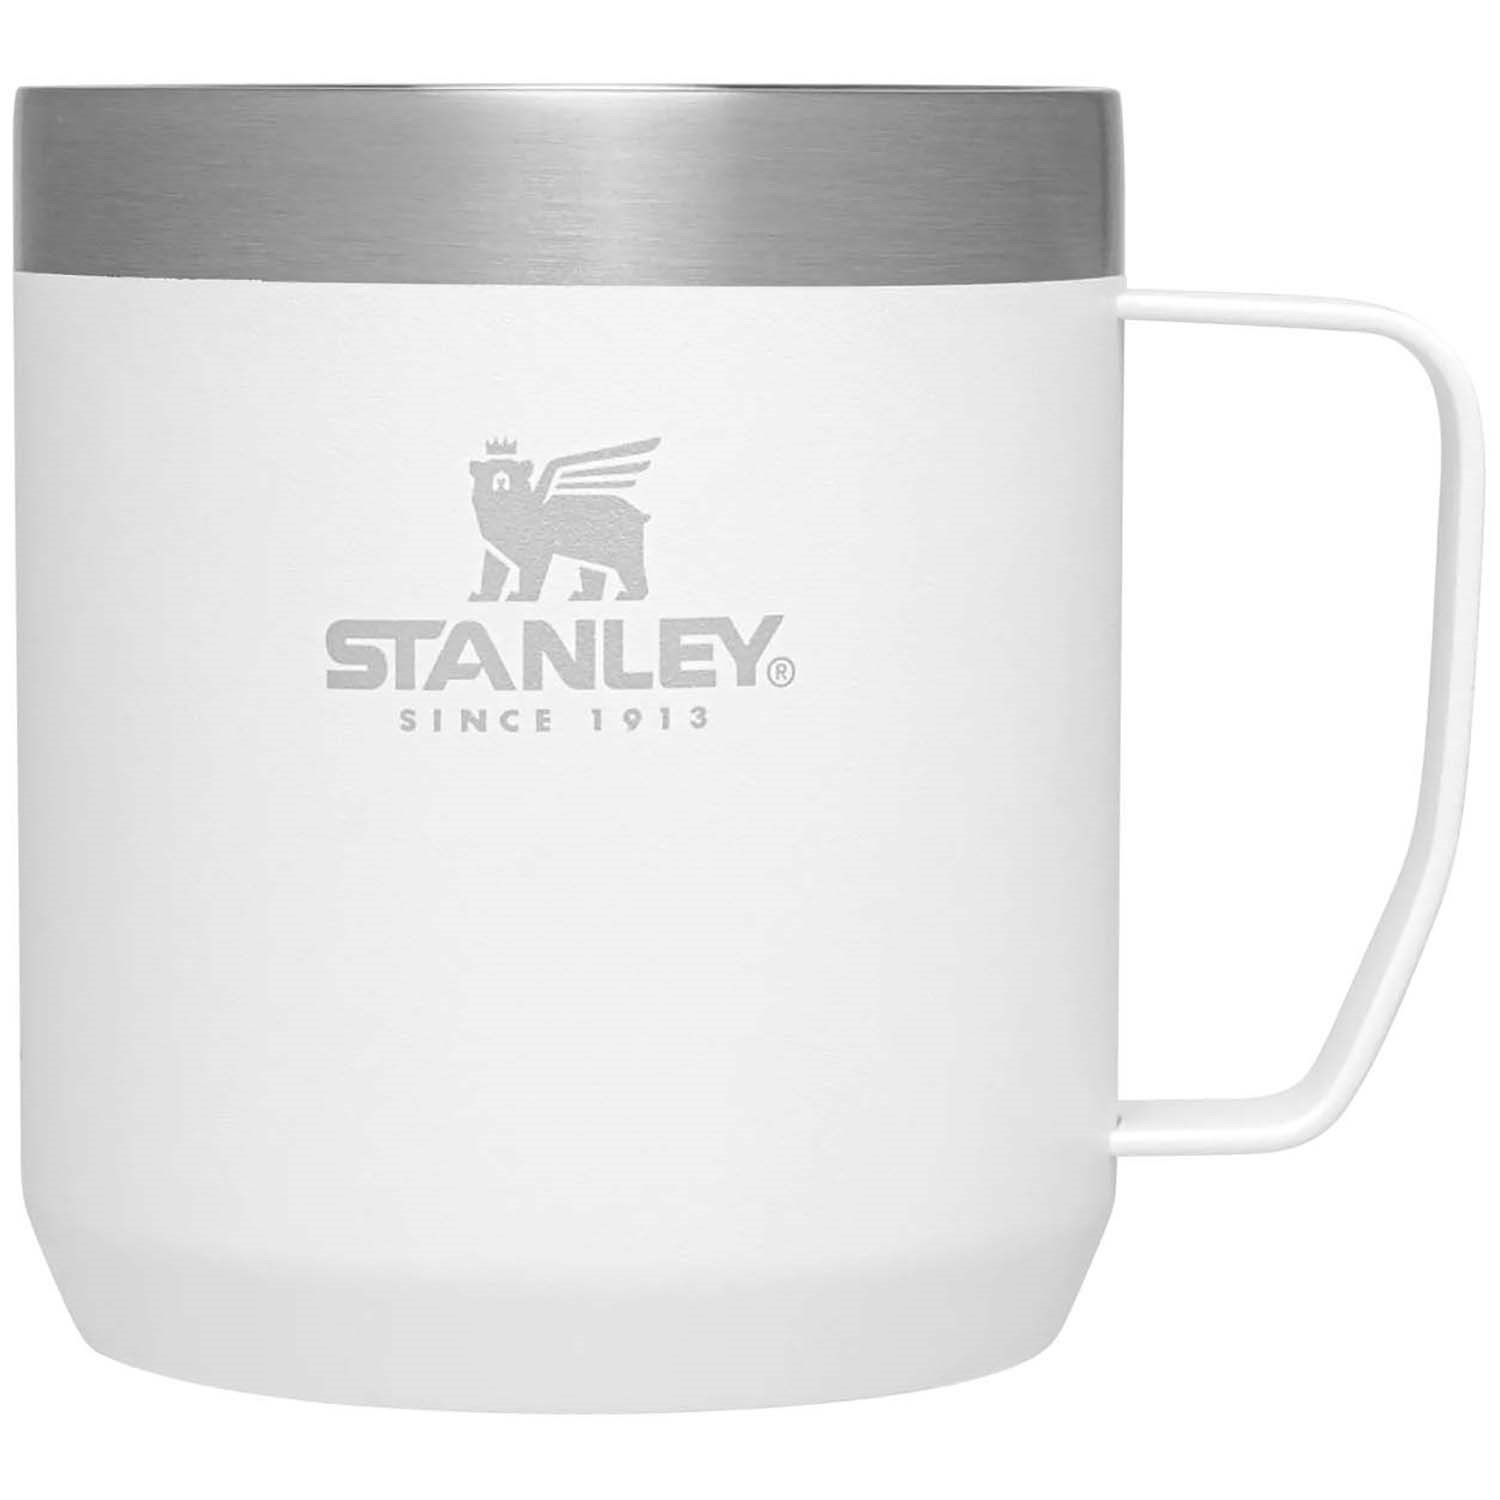 2-Pack STANLEY The Legendary Camp Vacuum Insulated Coffee Mug w/ Lid 12oz